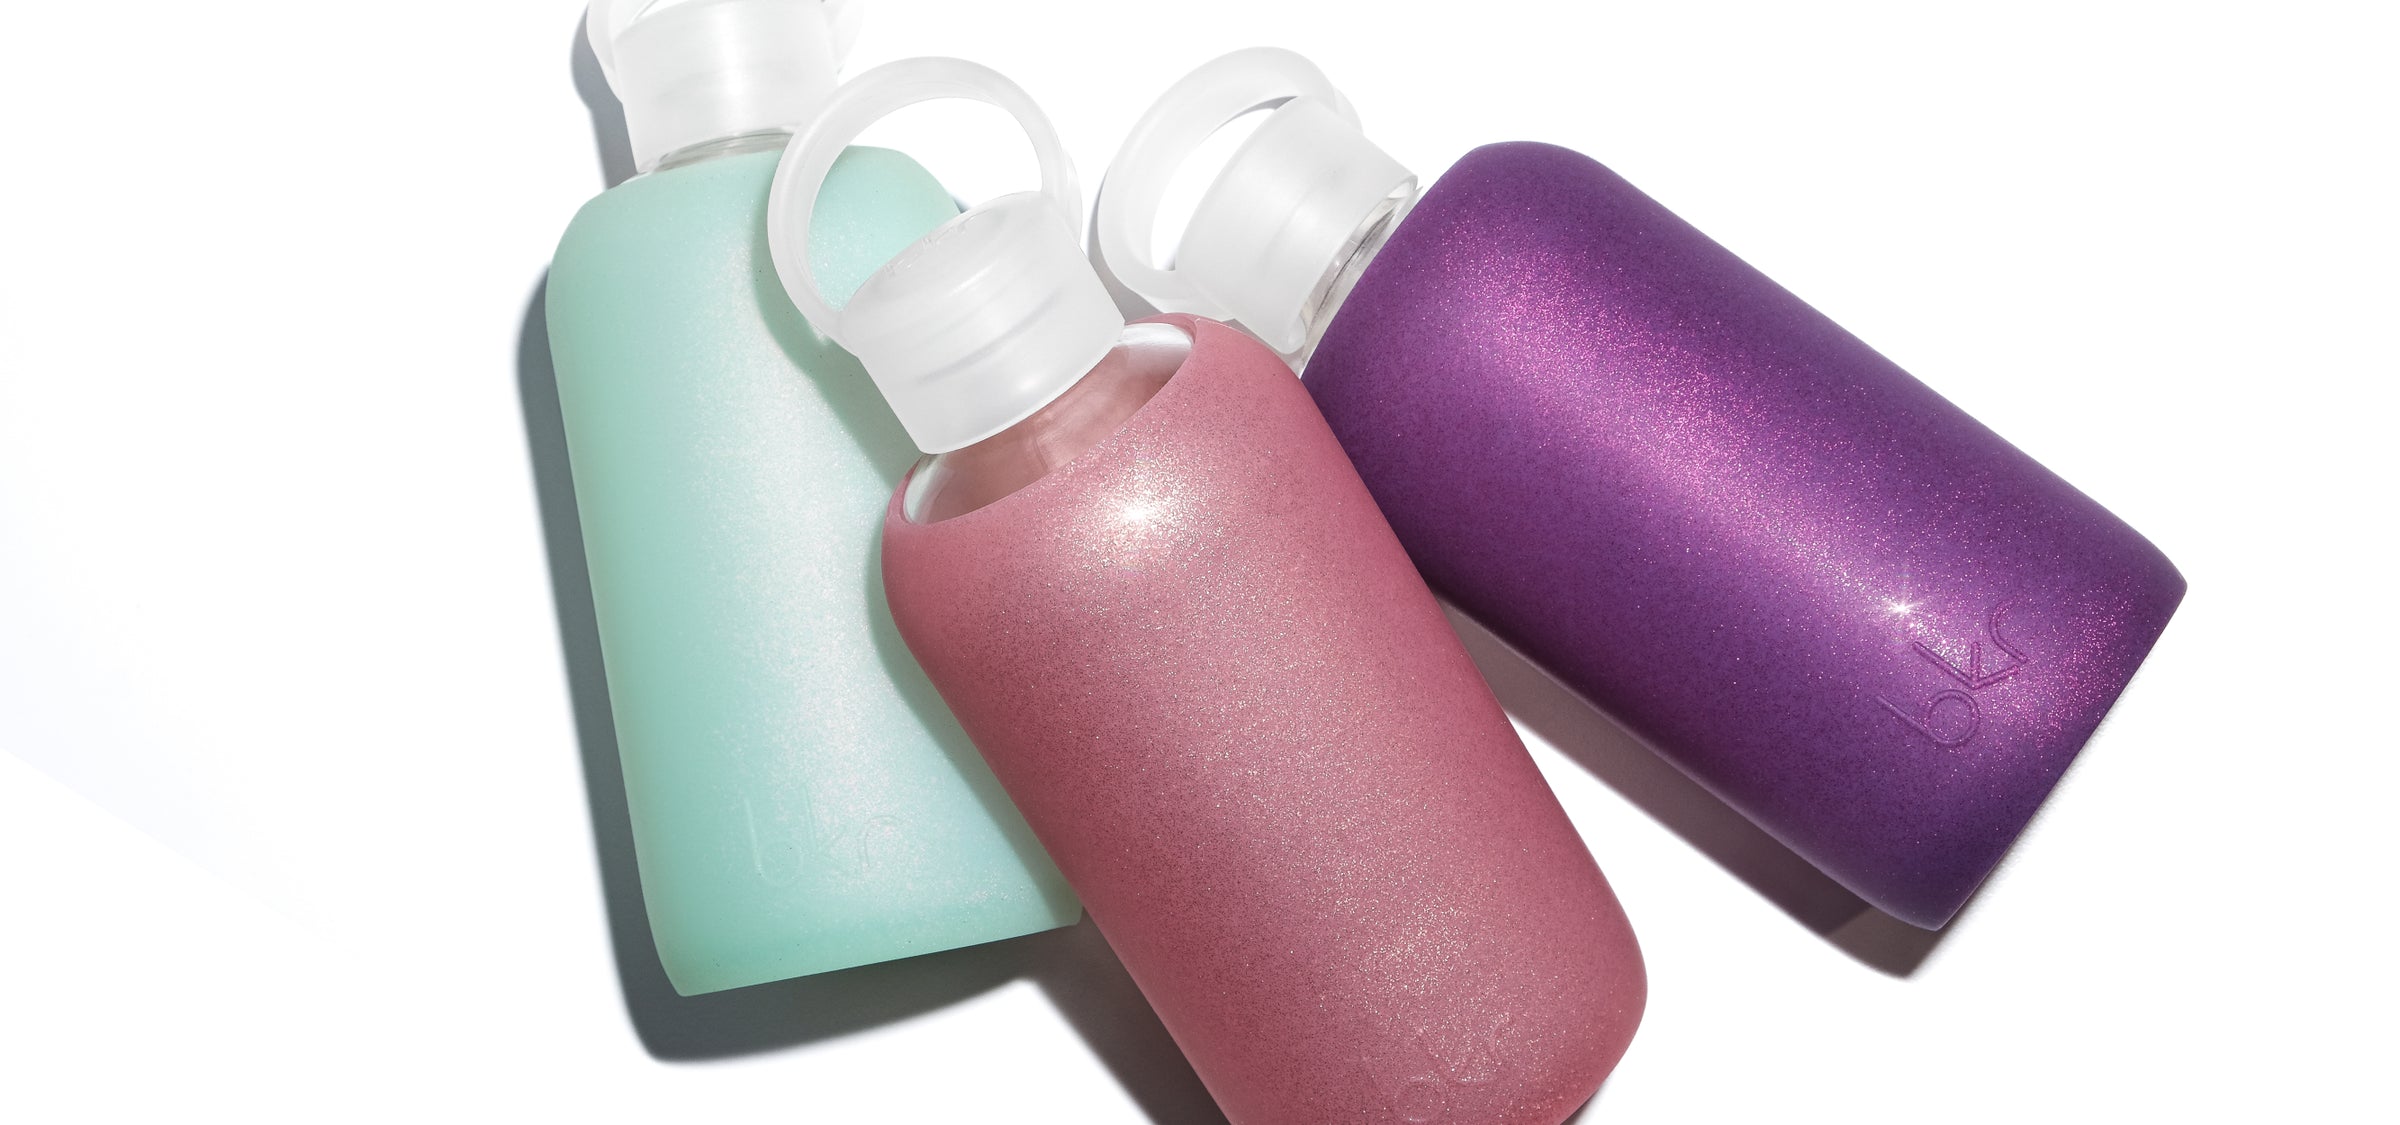 The Sparkley 500ml bkr reusable glass water bottles with silicone sleeves